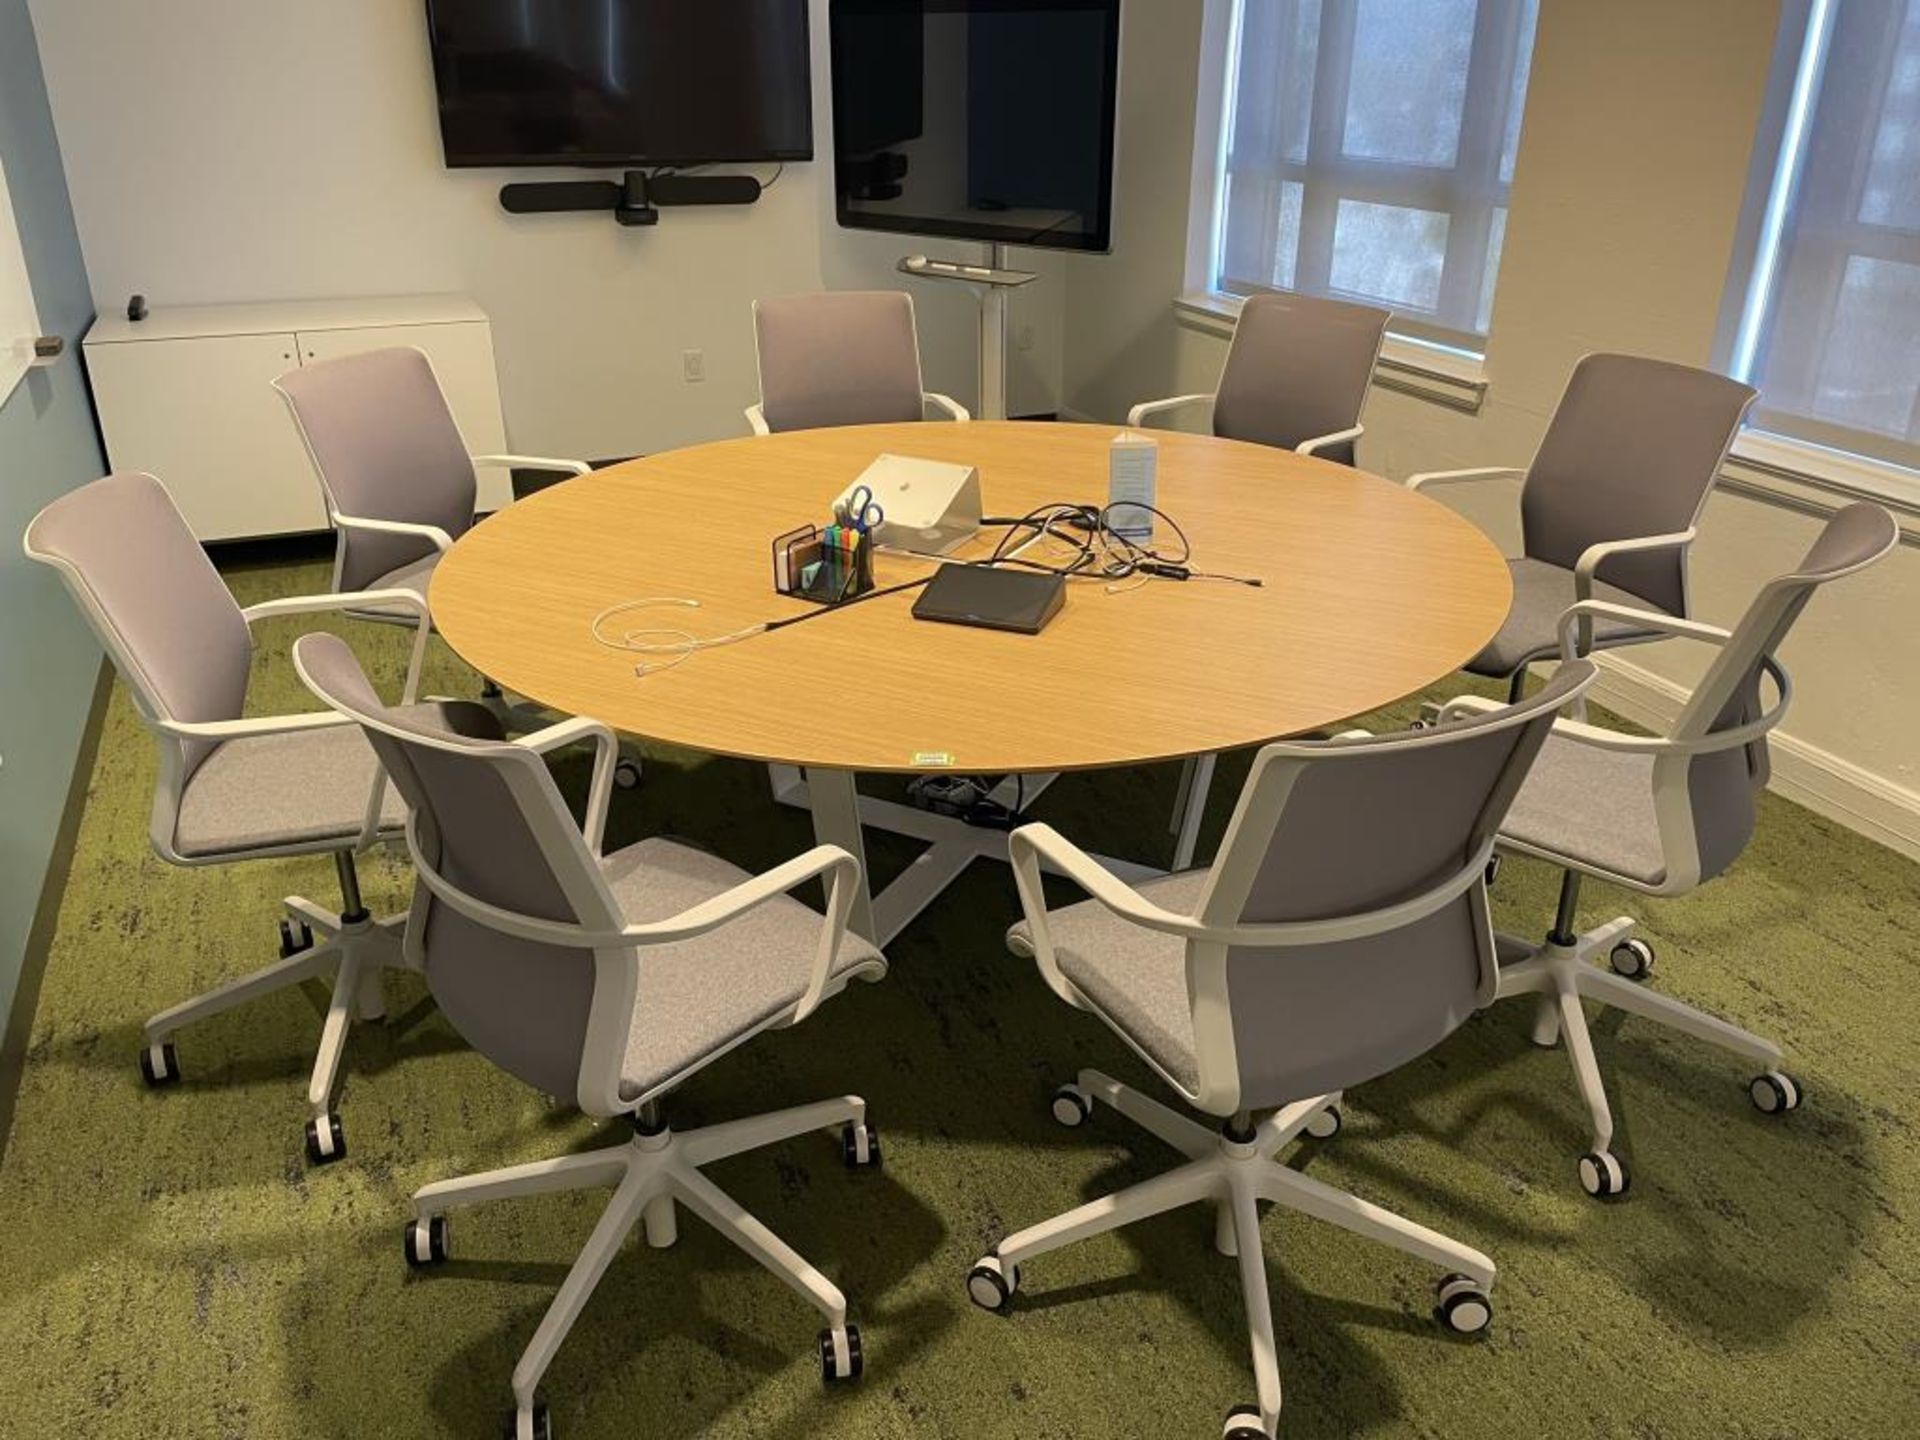 HPL Contract Round Conference Table 7' w/ Senator Task Chairs